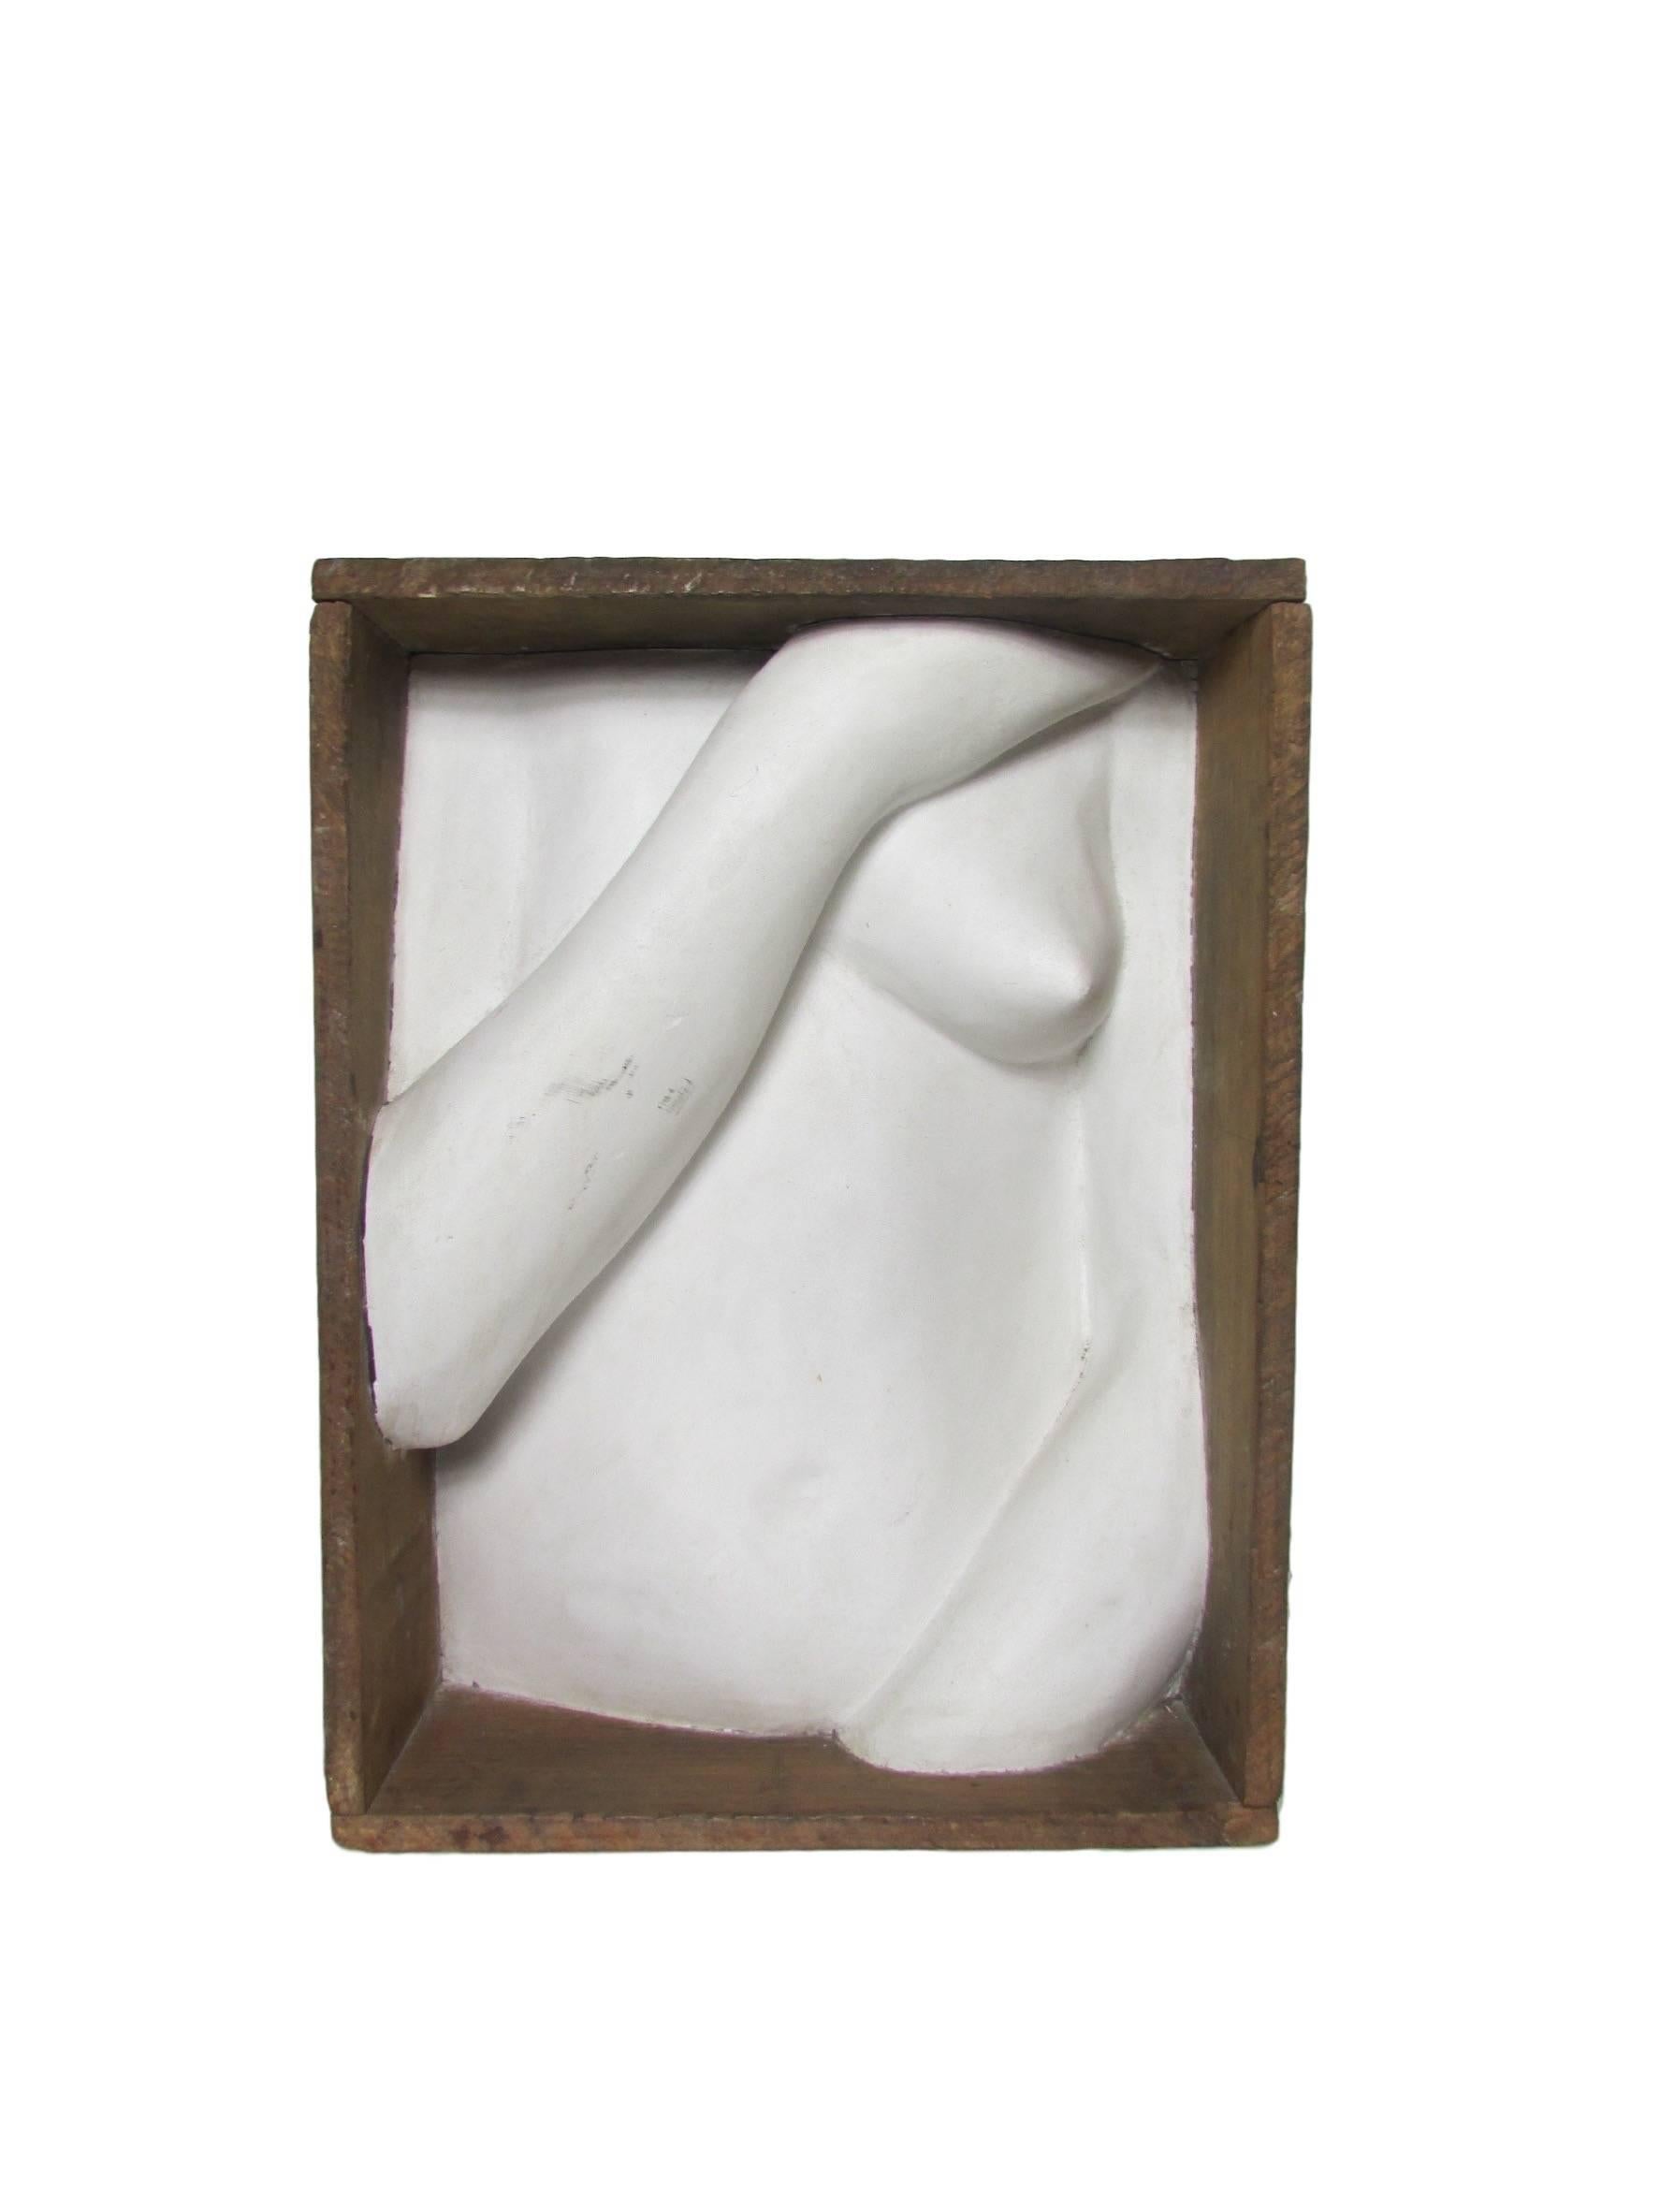 This is a unique vintage plaster sculpture of a female torso inside of a wood box.  Signed and dated 'Peterson 75.'